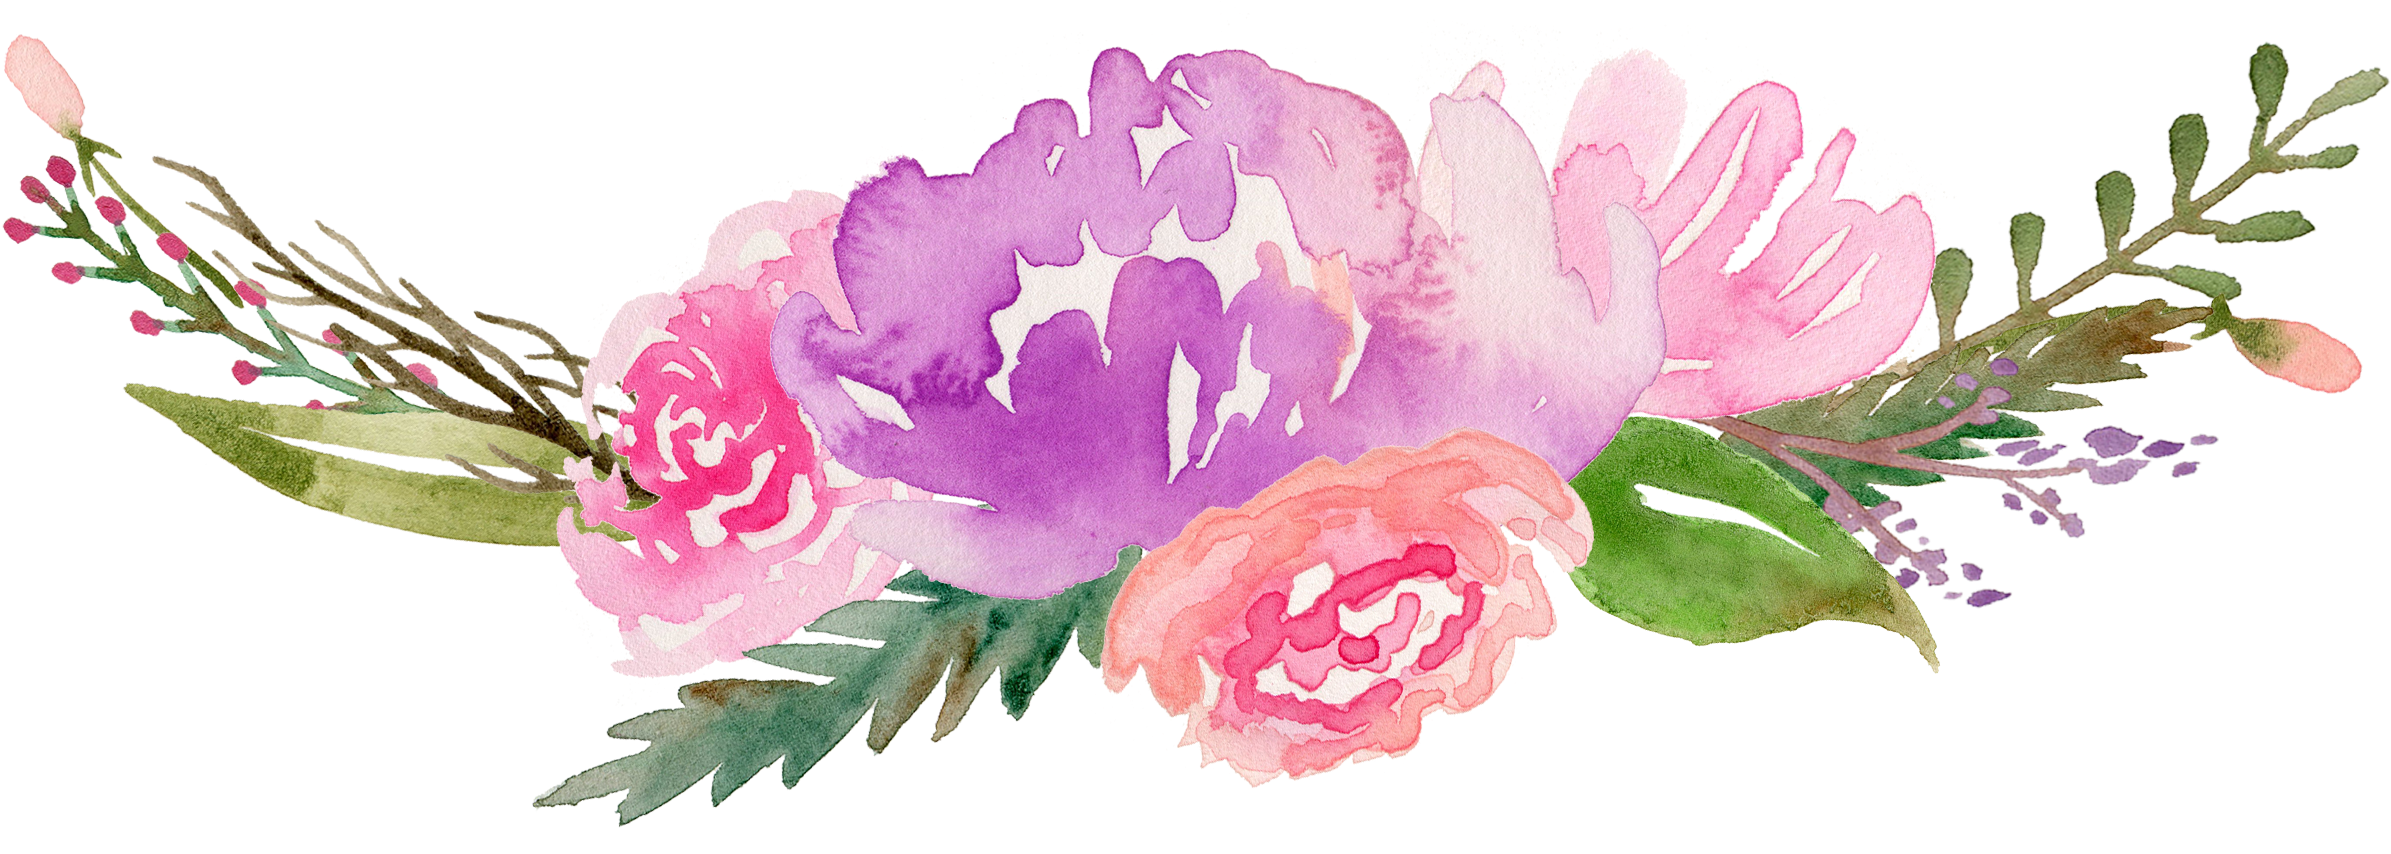 clipart royalty free flower